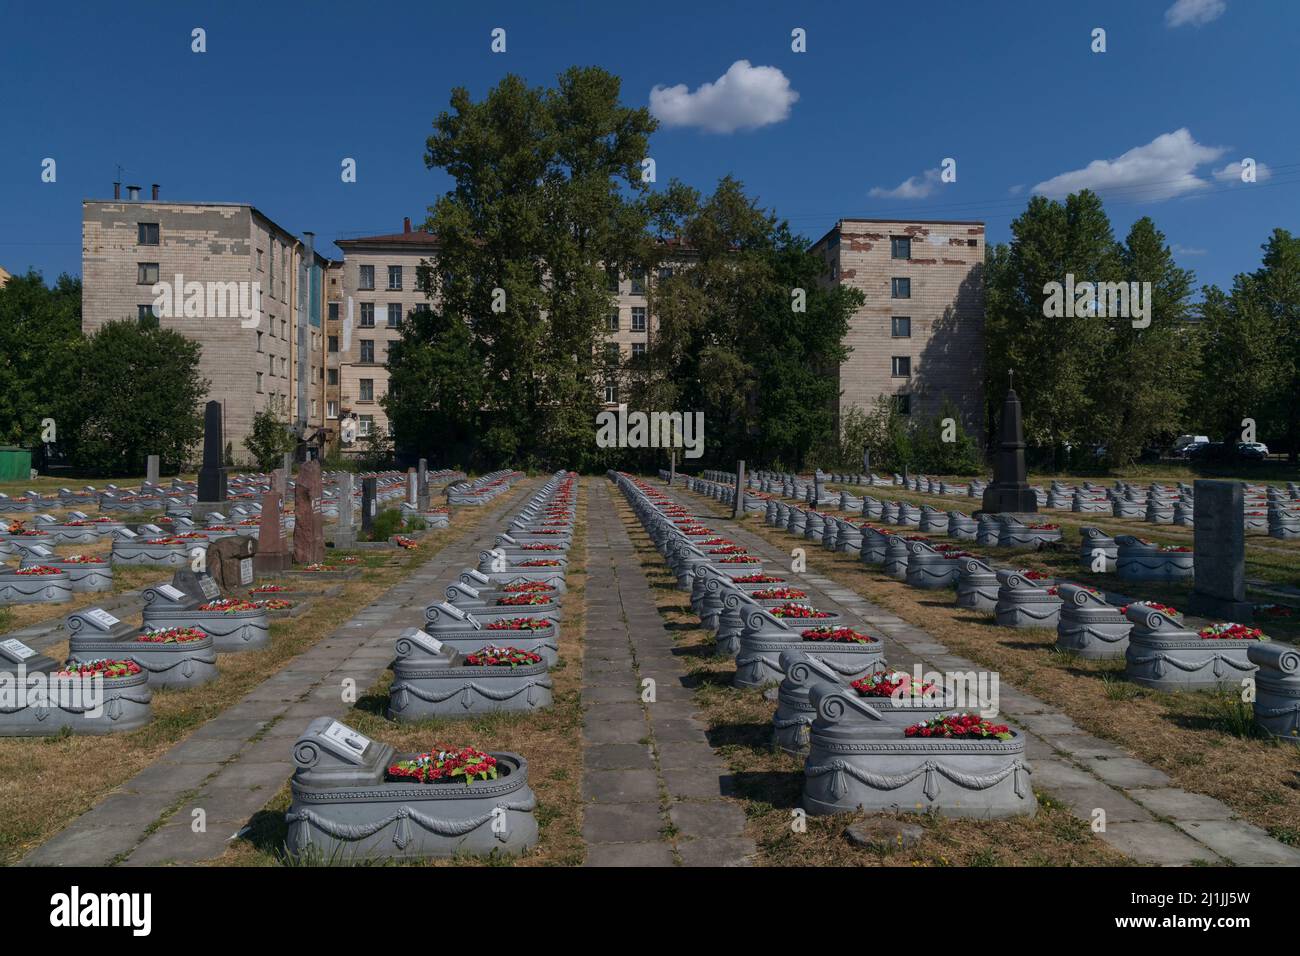 Saint Petersburg, Russia - July 18, 2021: Rows of graves at the military cemetery of the Second World War against the background of residential buildi Stock Photo